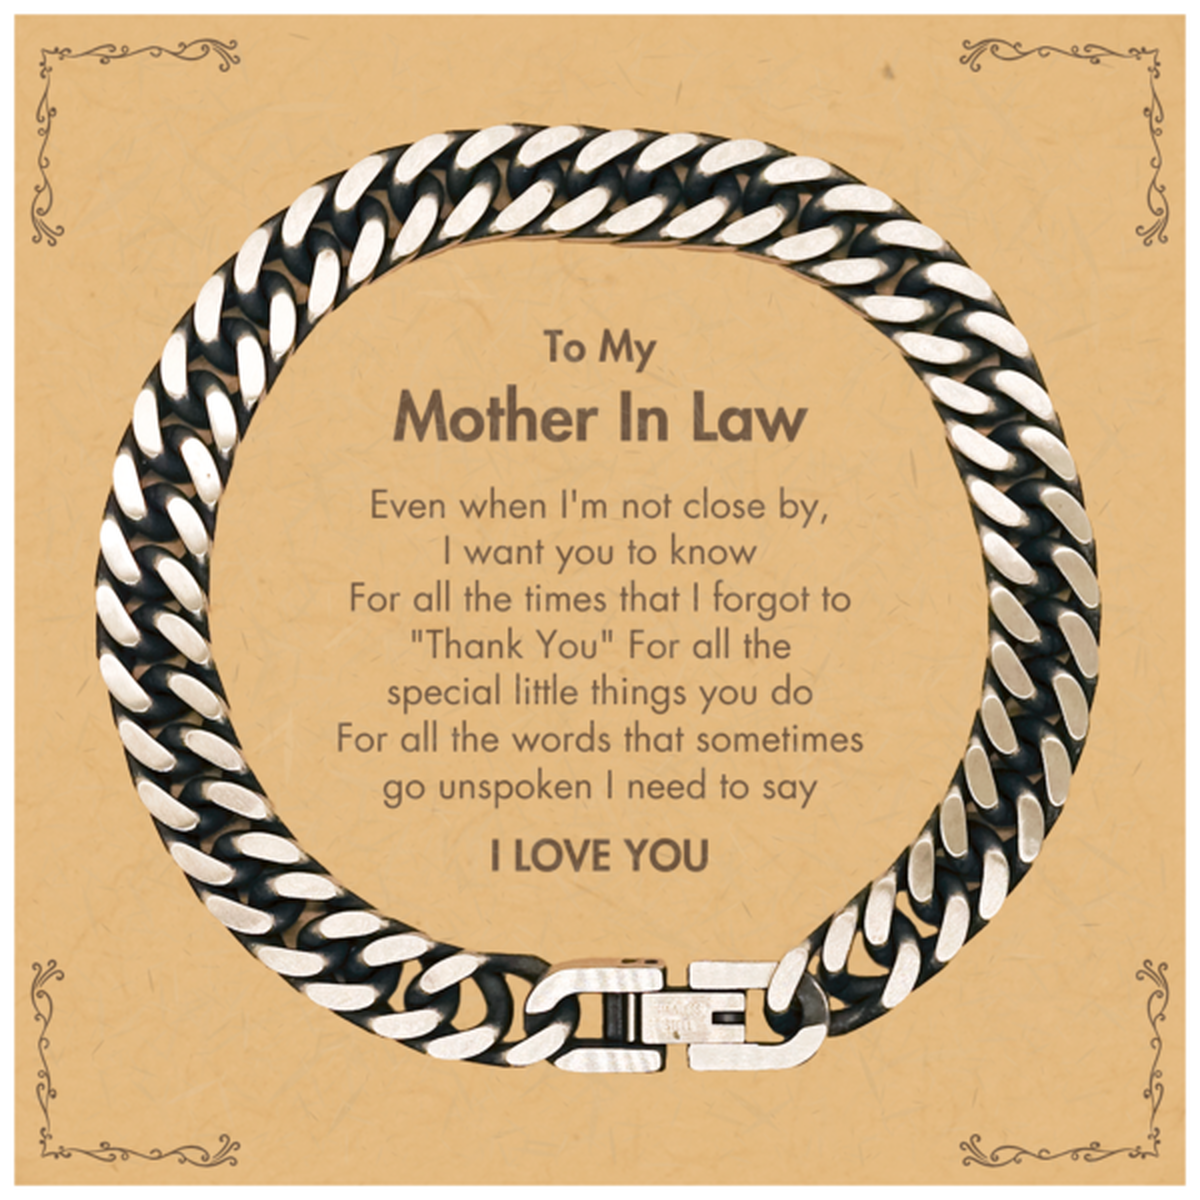 Thank You Gifts for Mother In Law, Keepsake Cuban Link Chain Bracelet Gifts for Mother In Law Birthday Mother's day Father's Day Mother In Law For all the words That sometimes go unspoken I need to say I LOVE YOU